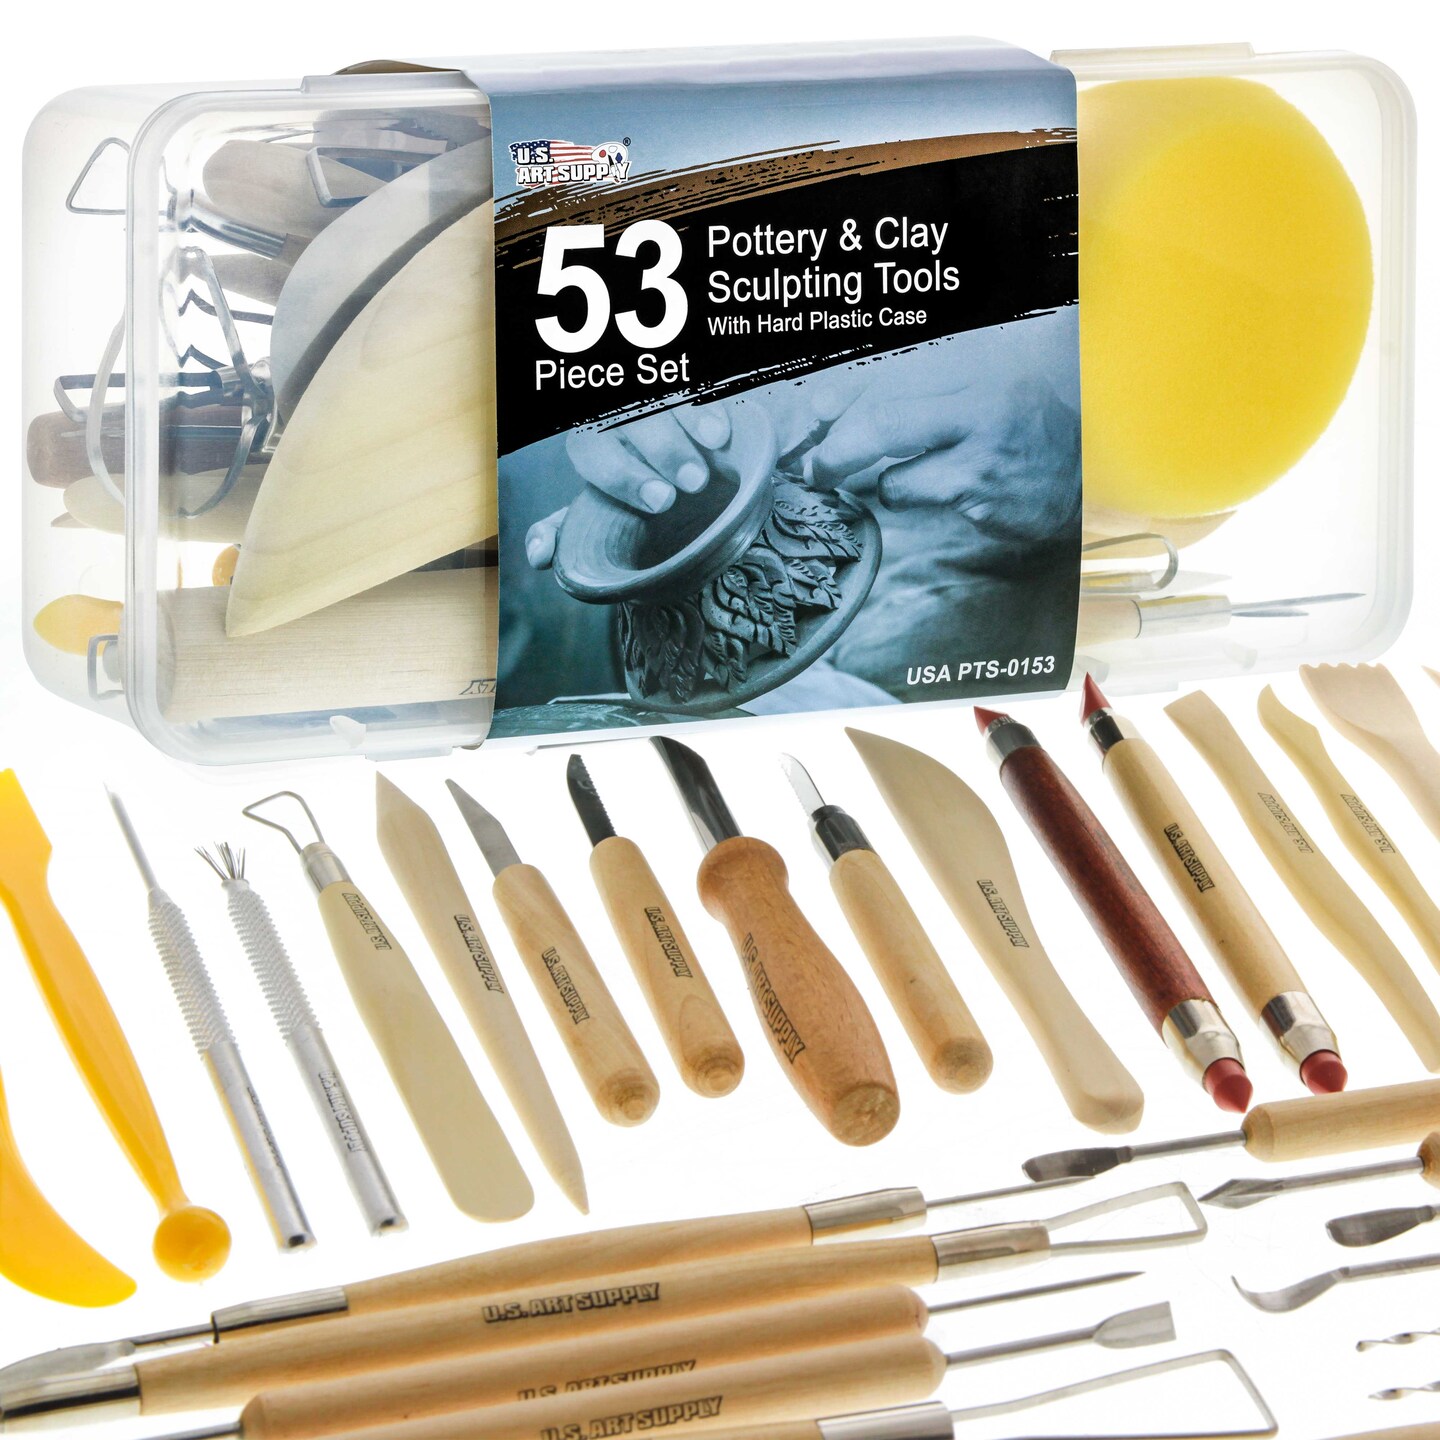 ToolTreaux Complete Pottery Tools Set Sculpting Clay Art Supplies with Tool Box, 28pc